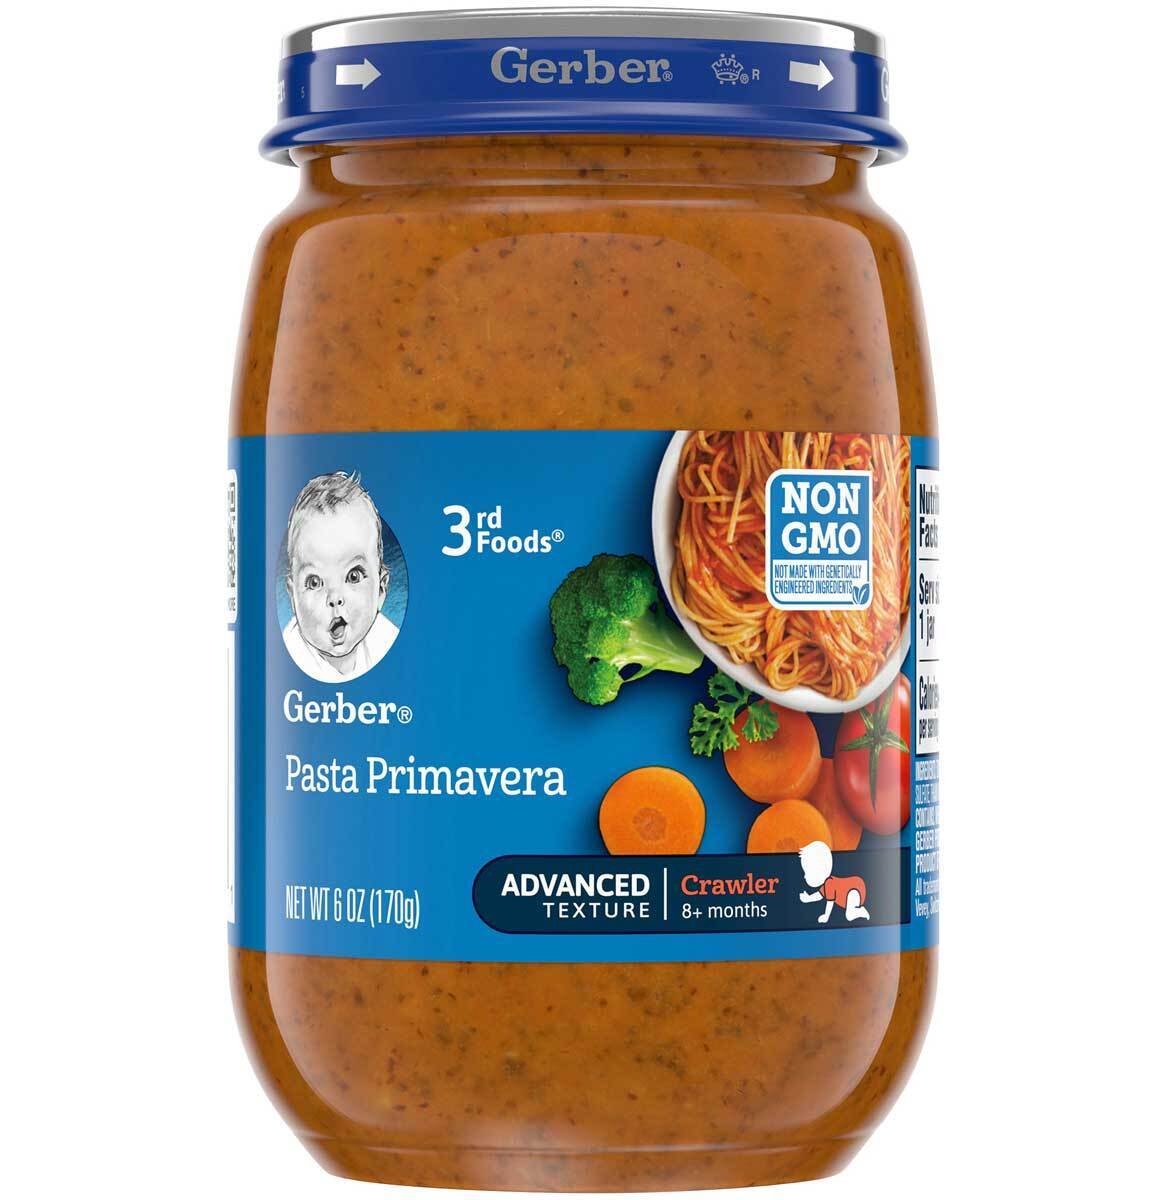 Gerber 3rd Foods Baby Food Primavera Pasta Non GMO 8+ Months – 6 Oz – Pack of 12 Gerber Does not apply